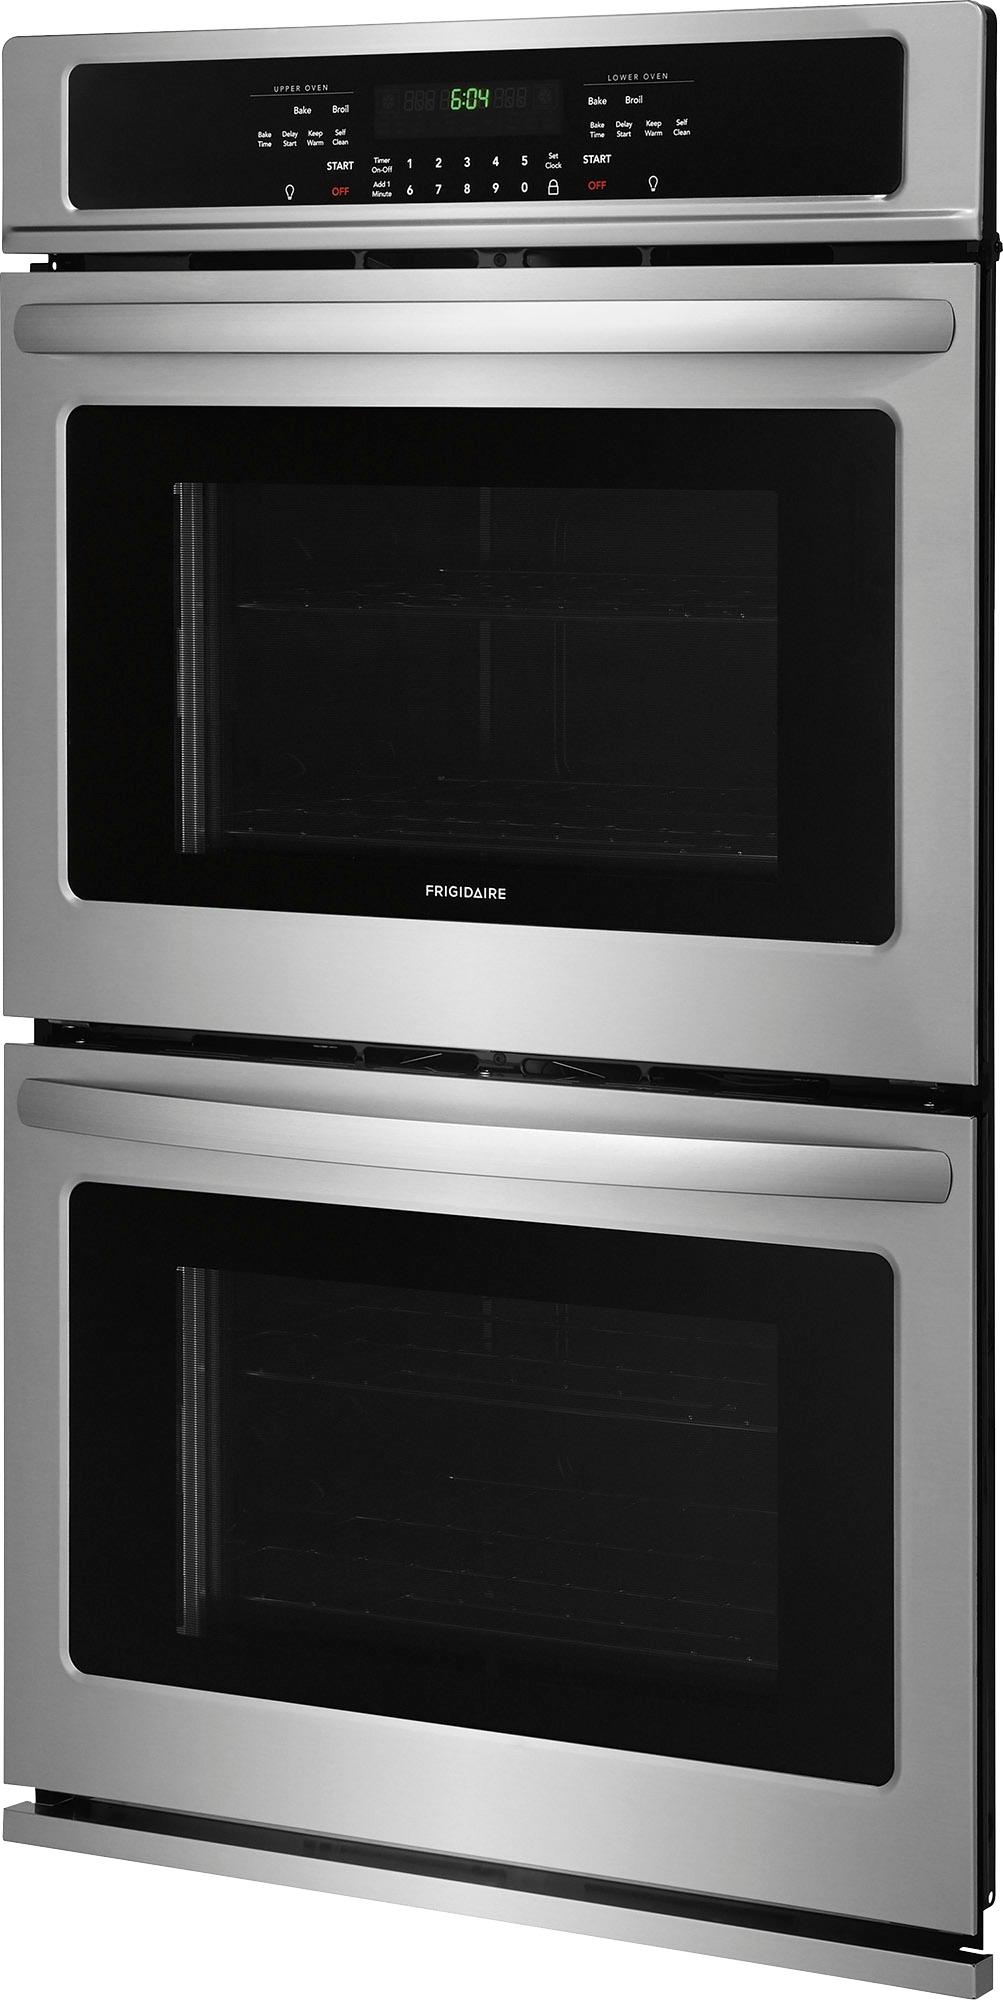 Left View: Frigidaire - 30" Built-In Double Electric Wall Oven - Stainless steel